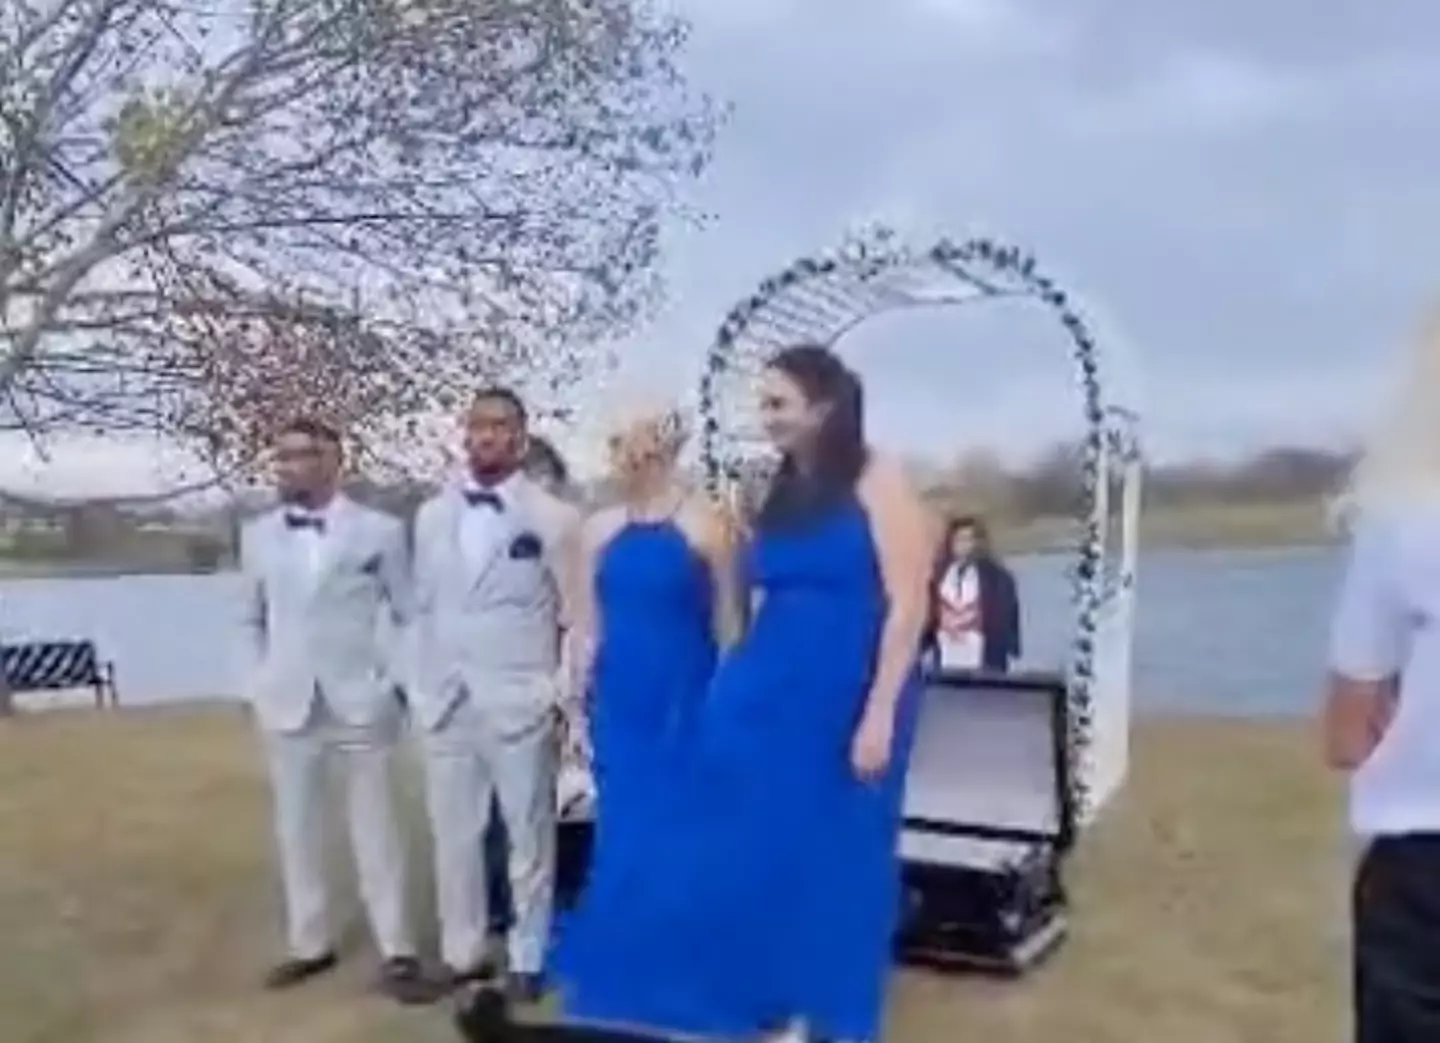 The groom's stunt caused outrage on social media.